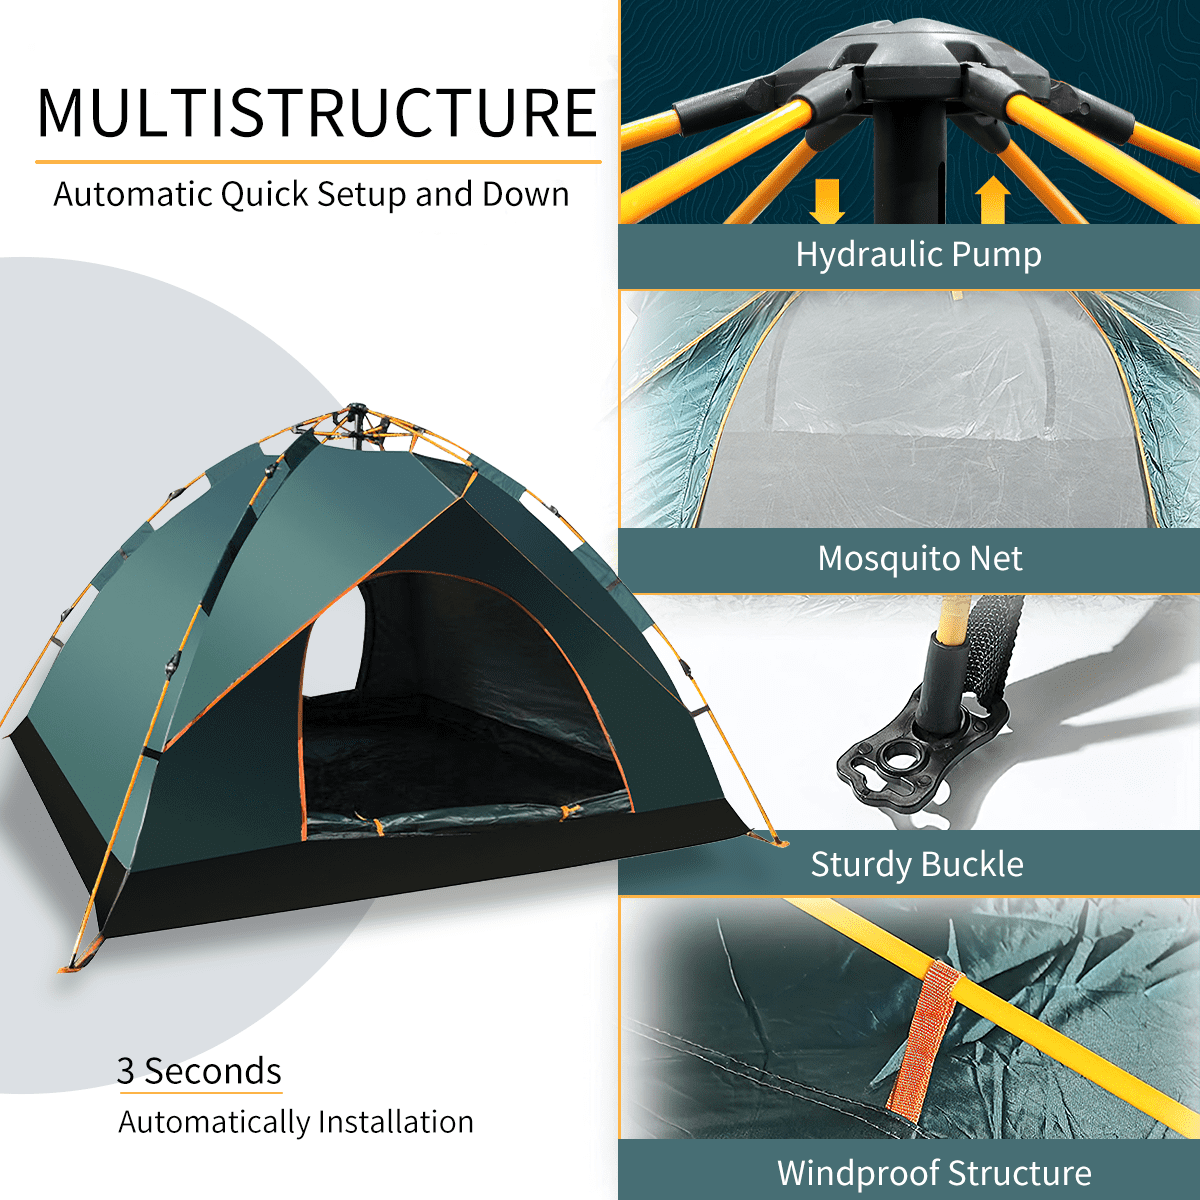 Automatic Pop Up Camping Tent for 3-4 Person, Portable Waterproof Dome Tent  with Mesh Windows, Instant Family Camping Tent, Outdoor Lightweight